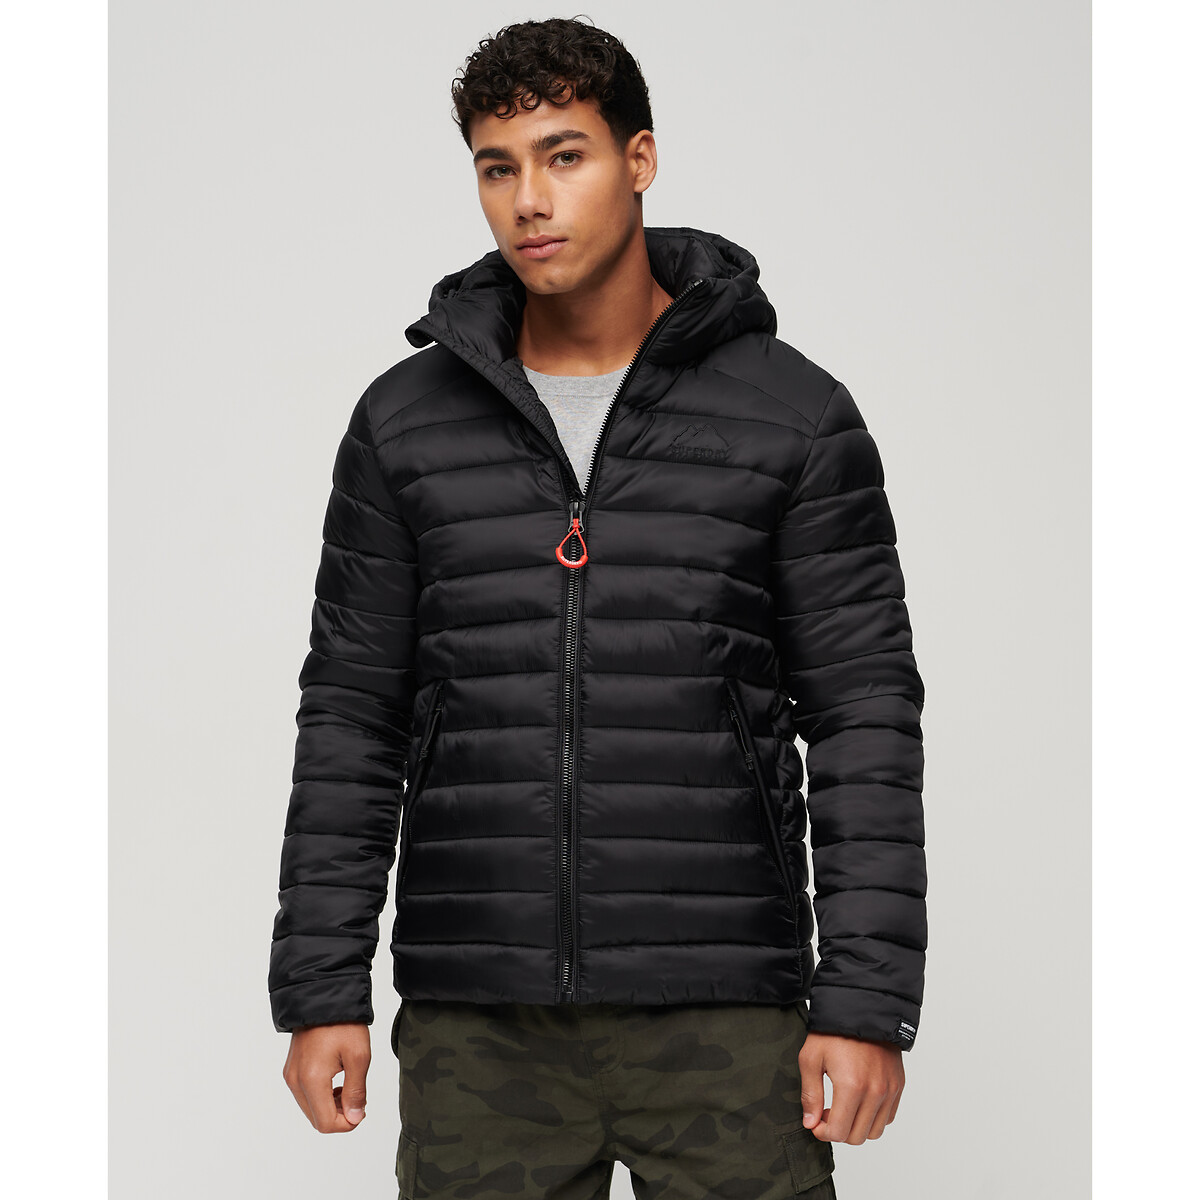 Fuji sport quilted padded jacket with embroidered logo and hood Superdry |  La Redoute | Übergangsjacken